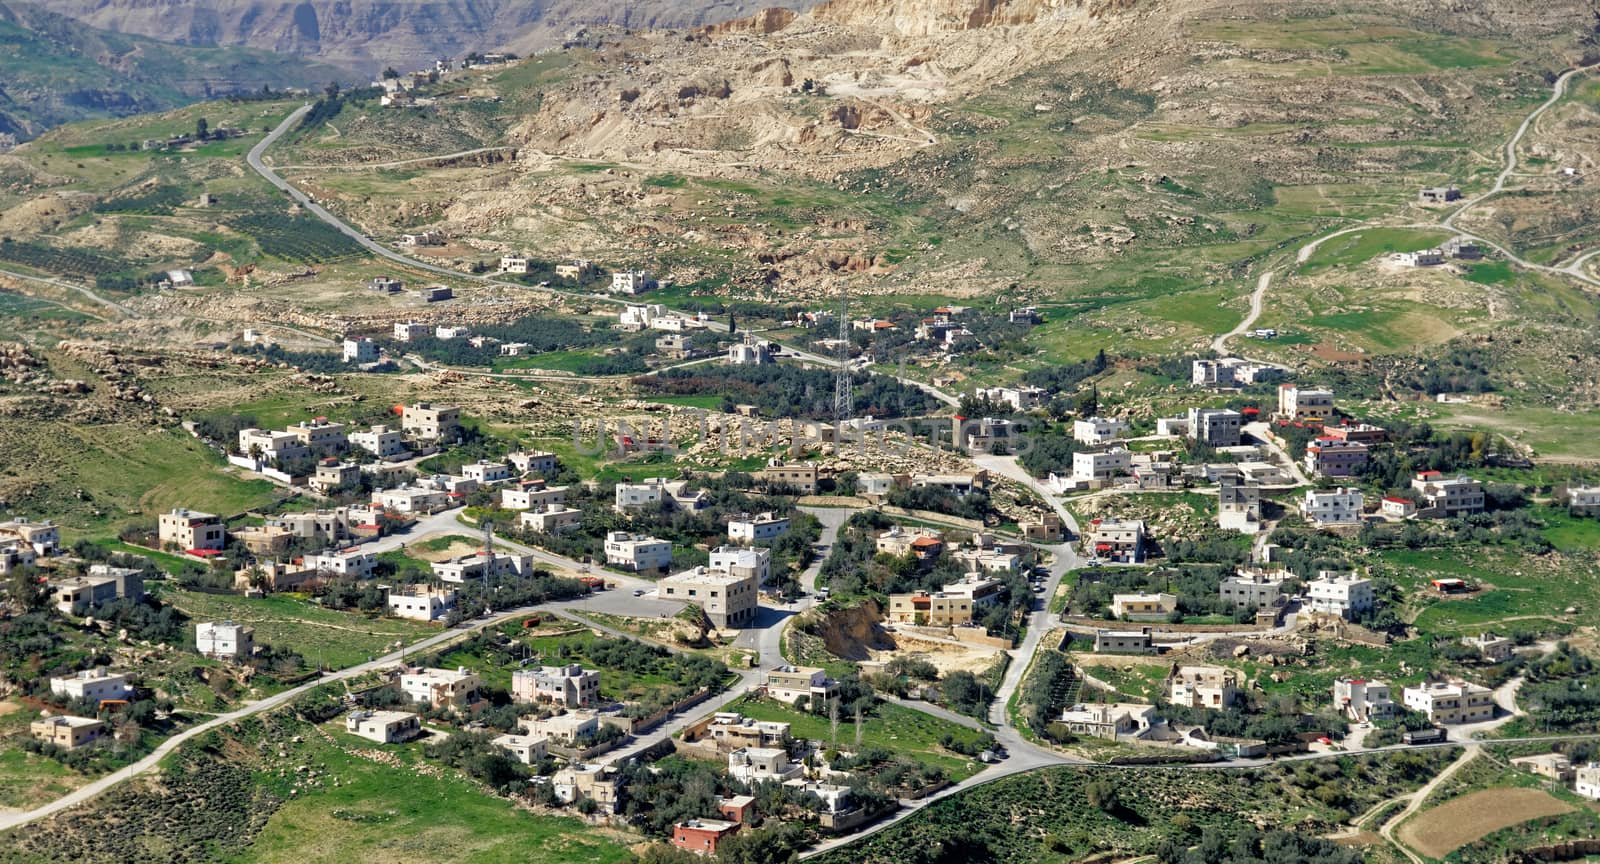 Village suburb of Karak in Jordan, taken from the tower of the crusader castle by geogif